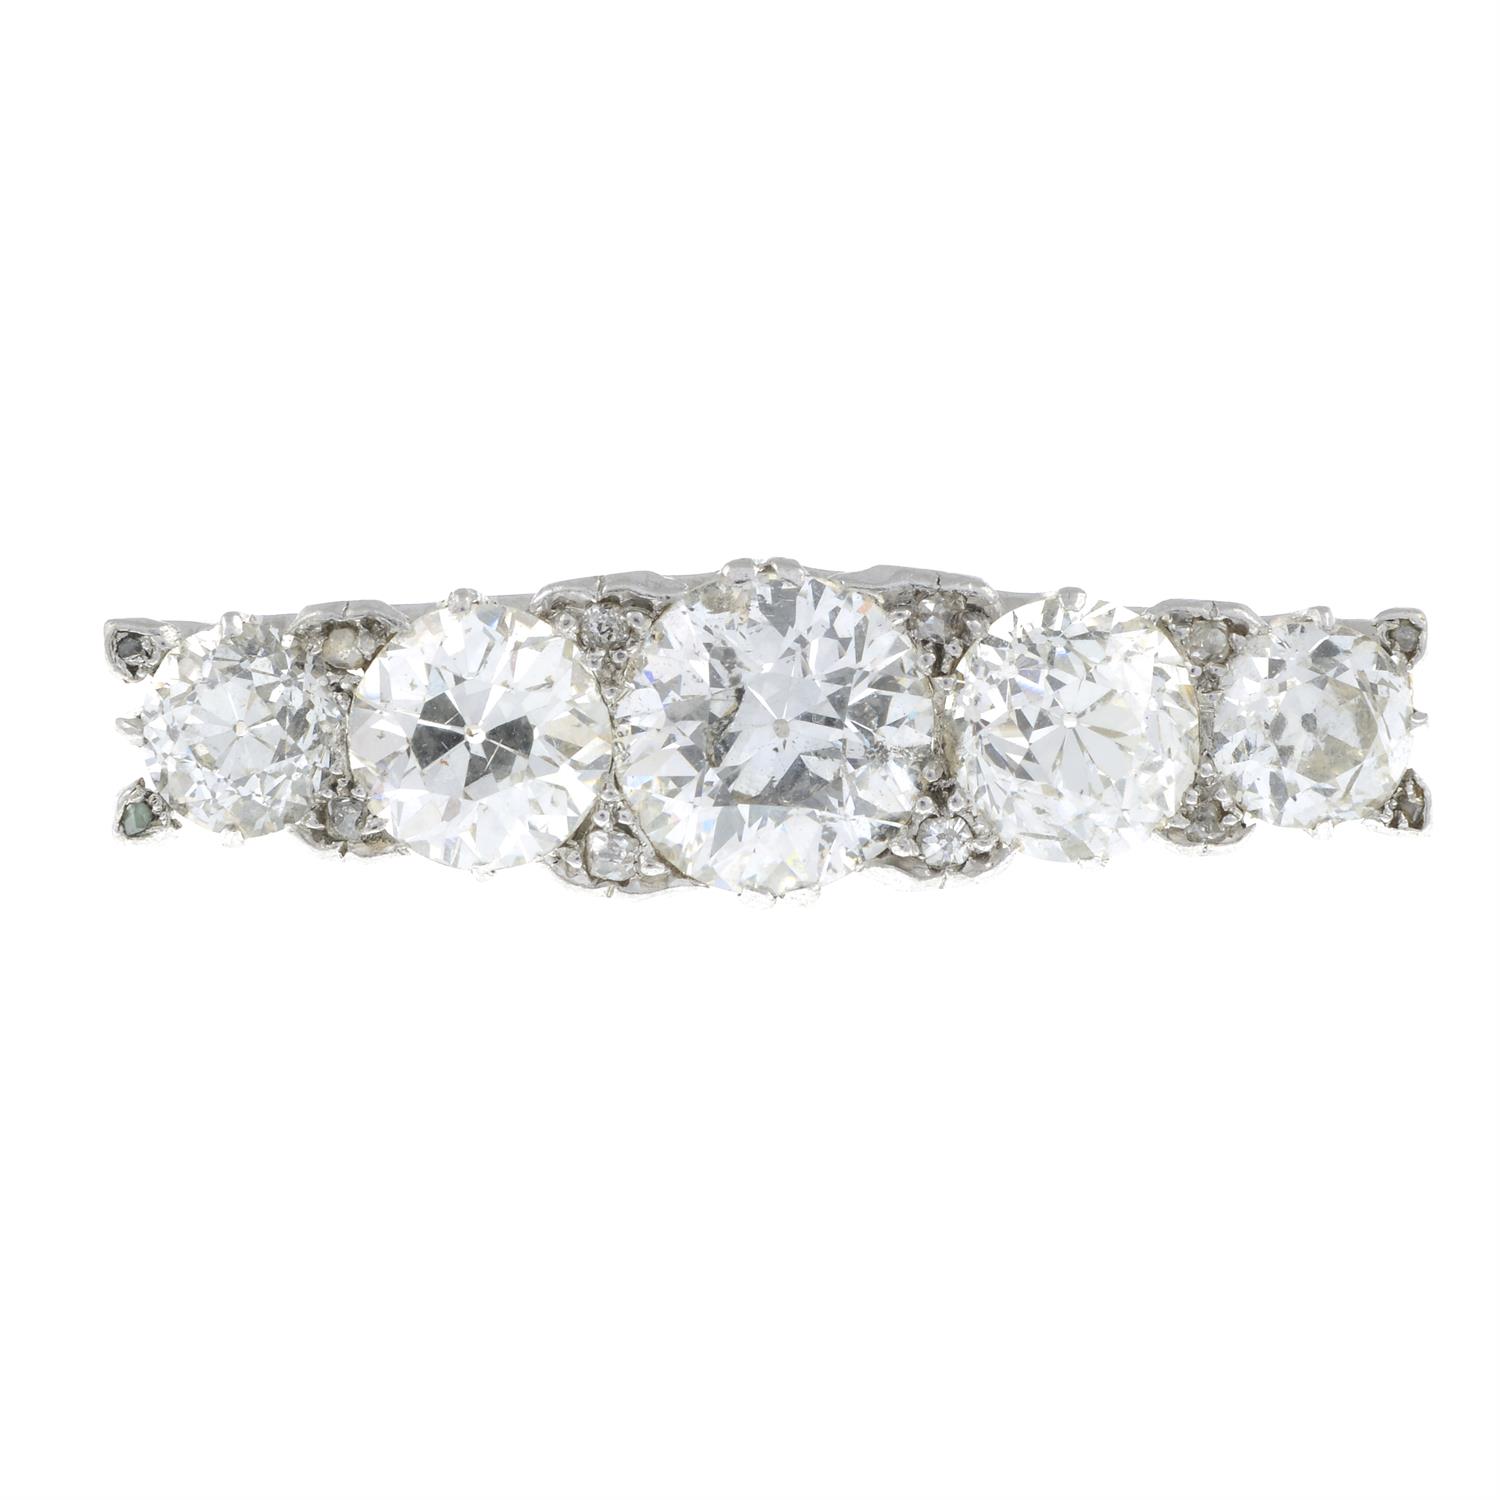 Early 20th century platinum and gold diamond bar brooch - Image 2 of 5